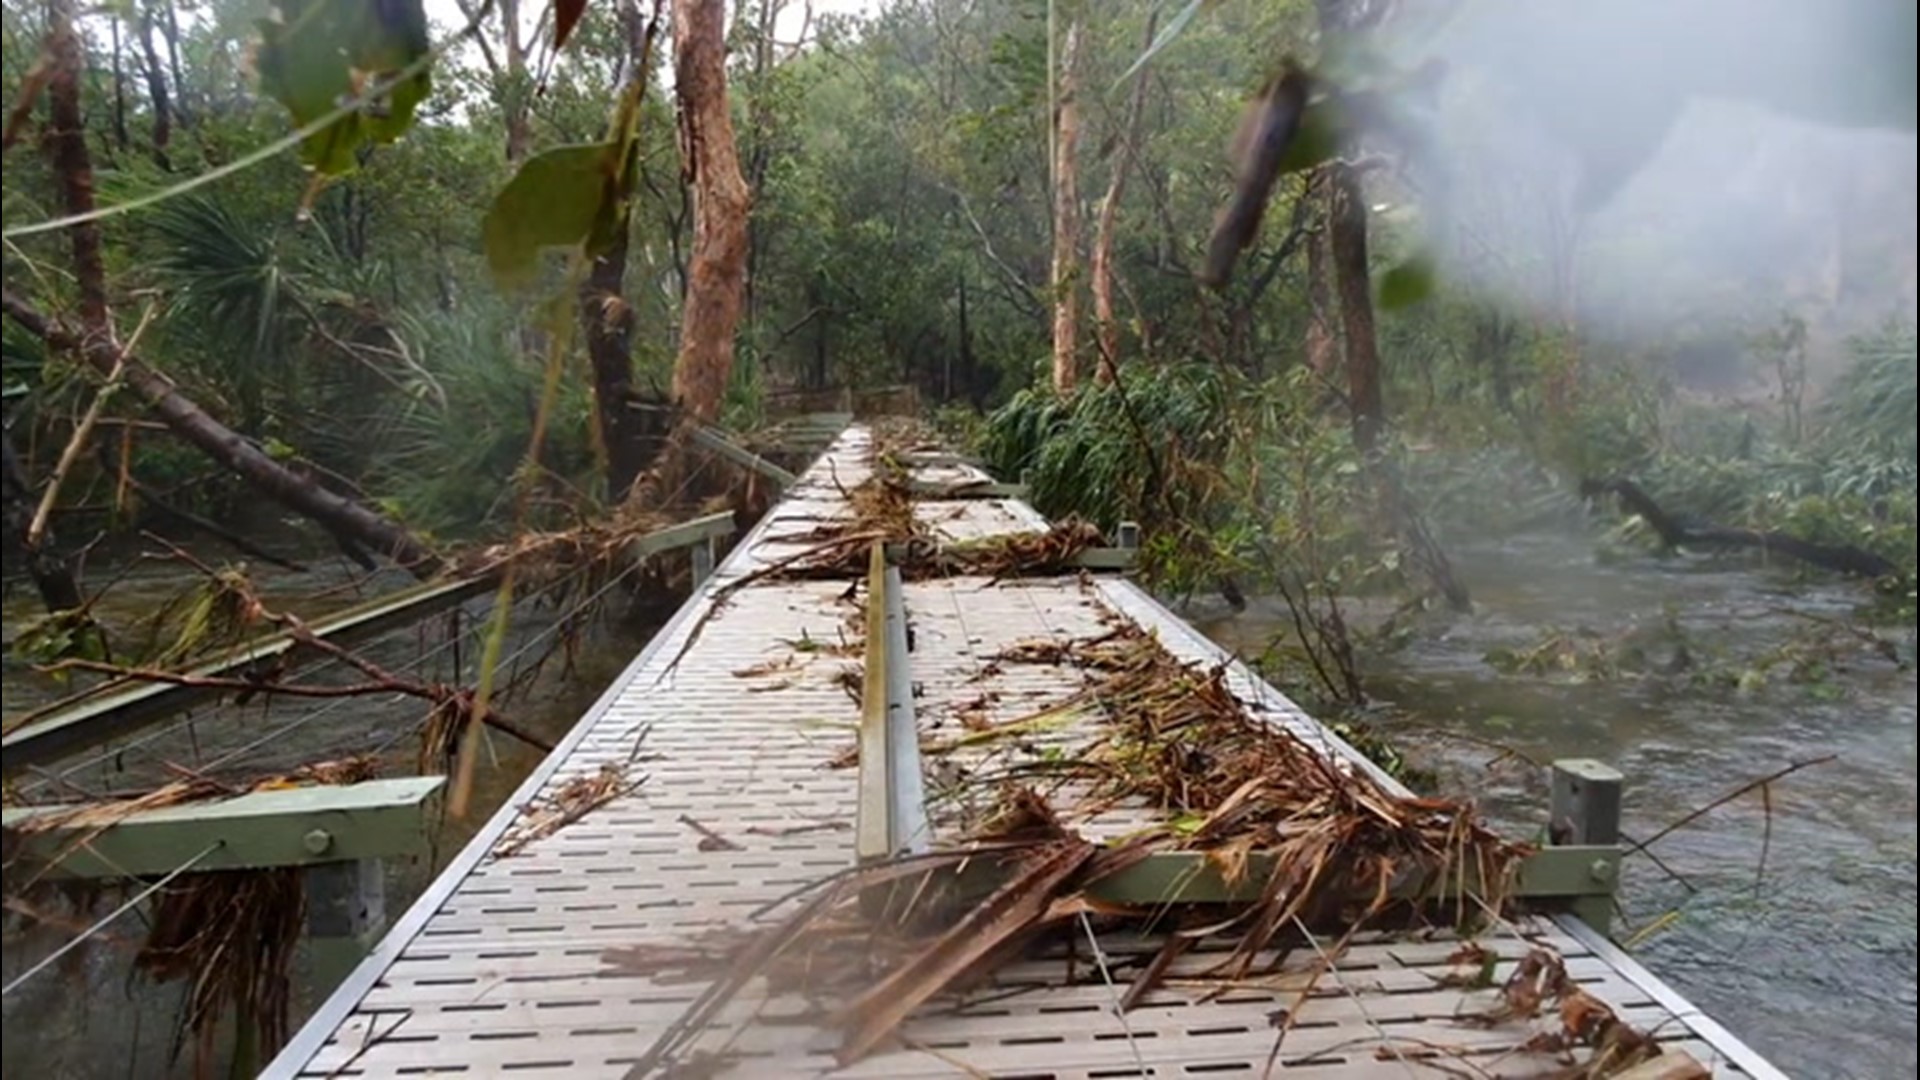 Litchfield National Park, located in the Northern Territory of Australia, suffered major damage after heavy rain and flooding hit the area on Feb. 28.